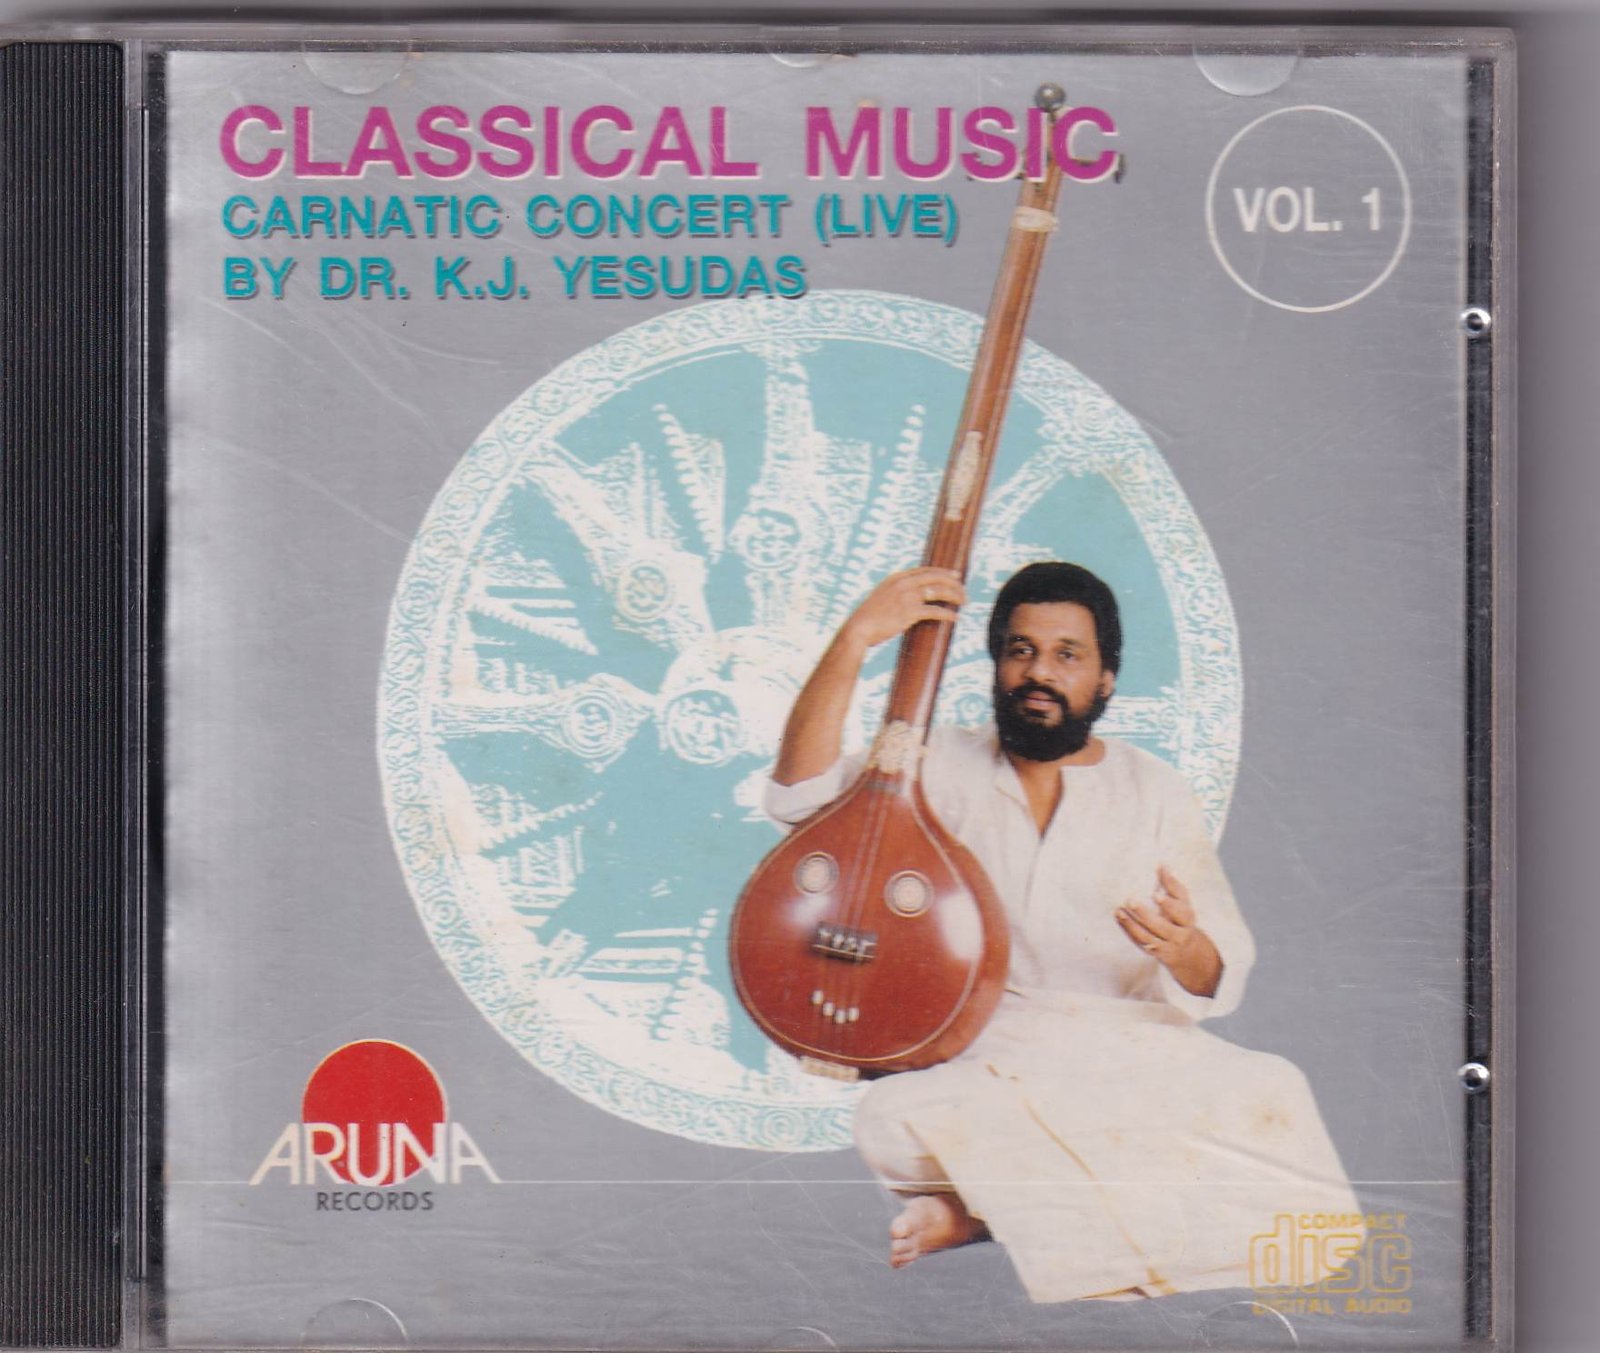 Classical Music Carnatic Concert (Live) by Dr. KJ Yesudas Vol.1 - Audio